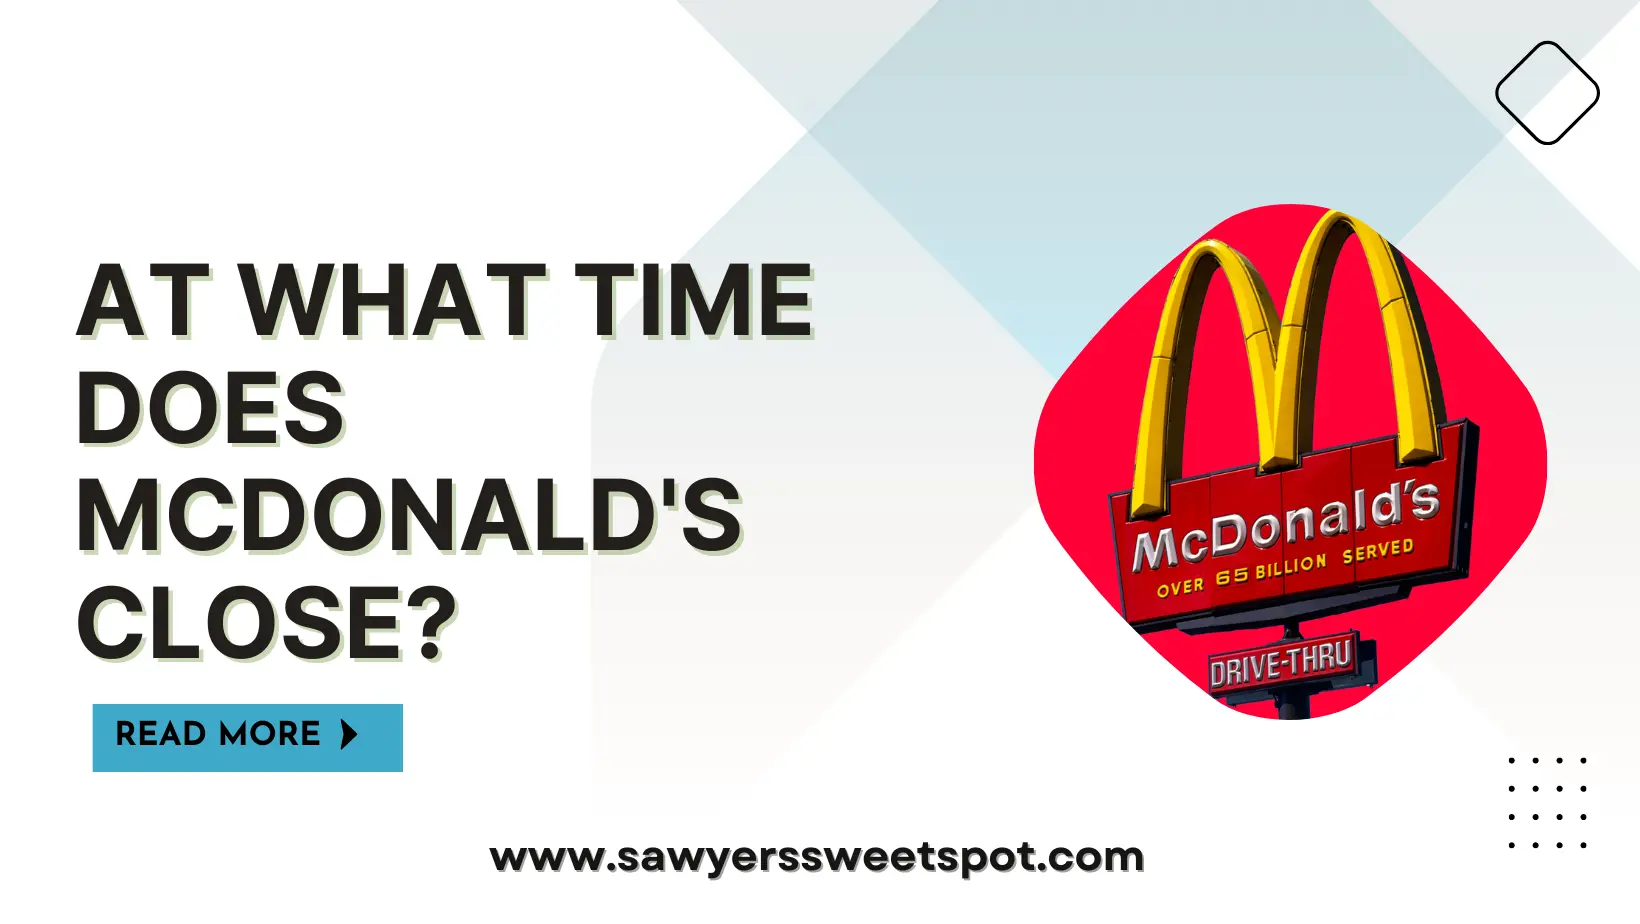 At What Time Does McDonald's Close?